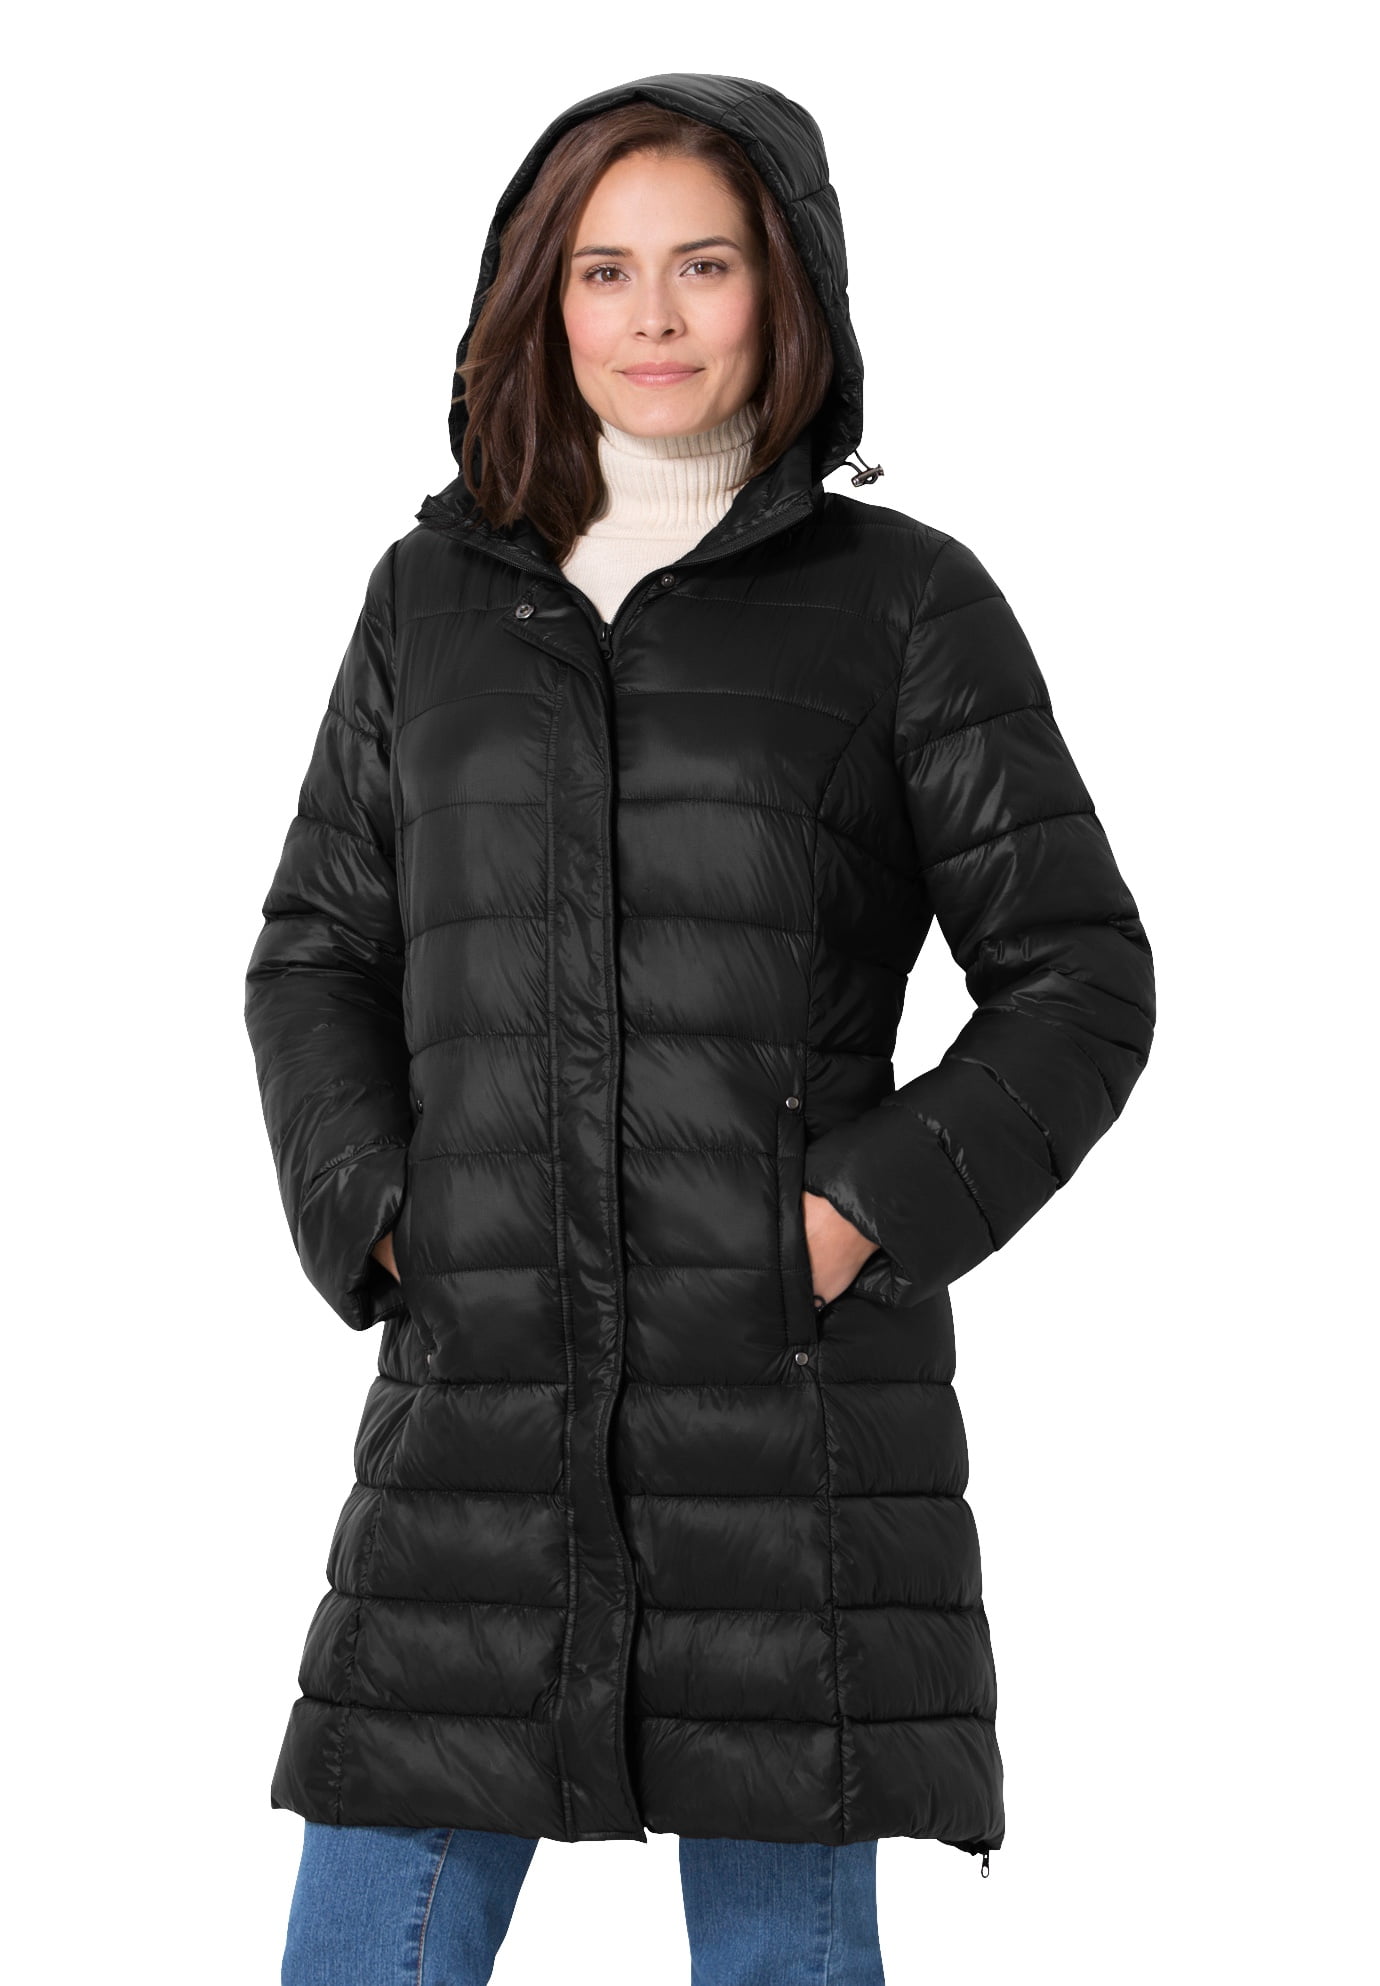 Woman Within - Woman Within Women's Plus Size Long Packable Puffer ...